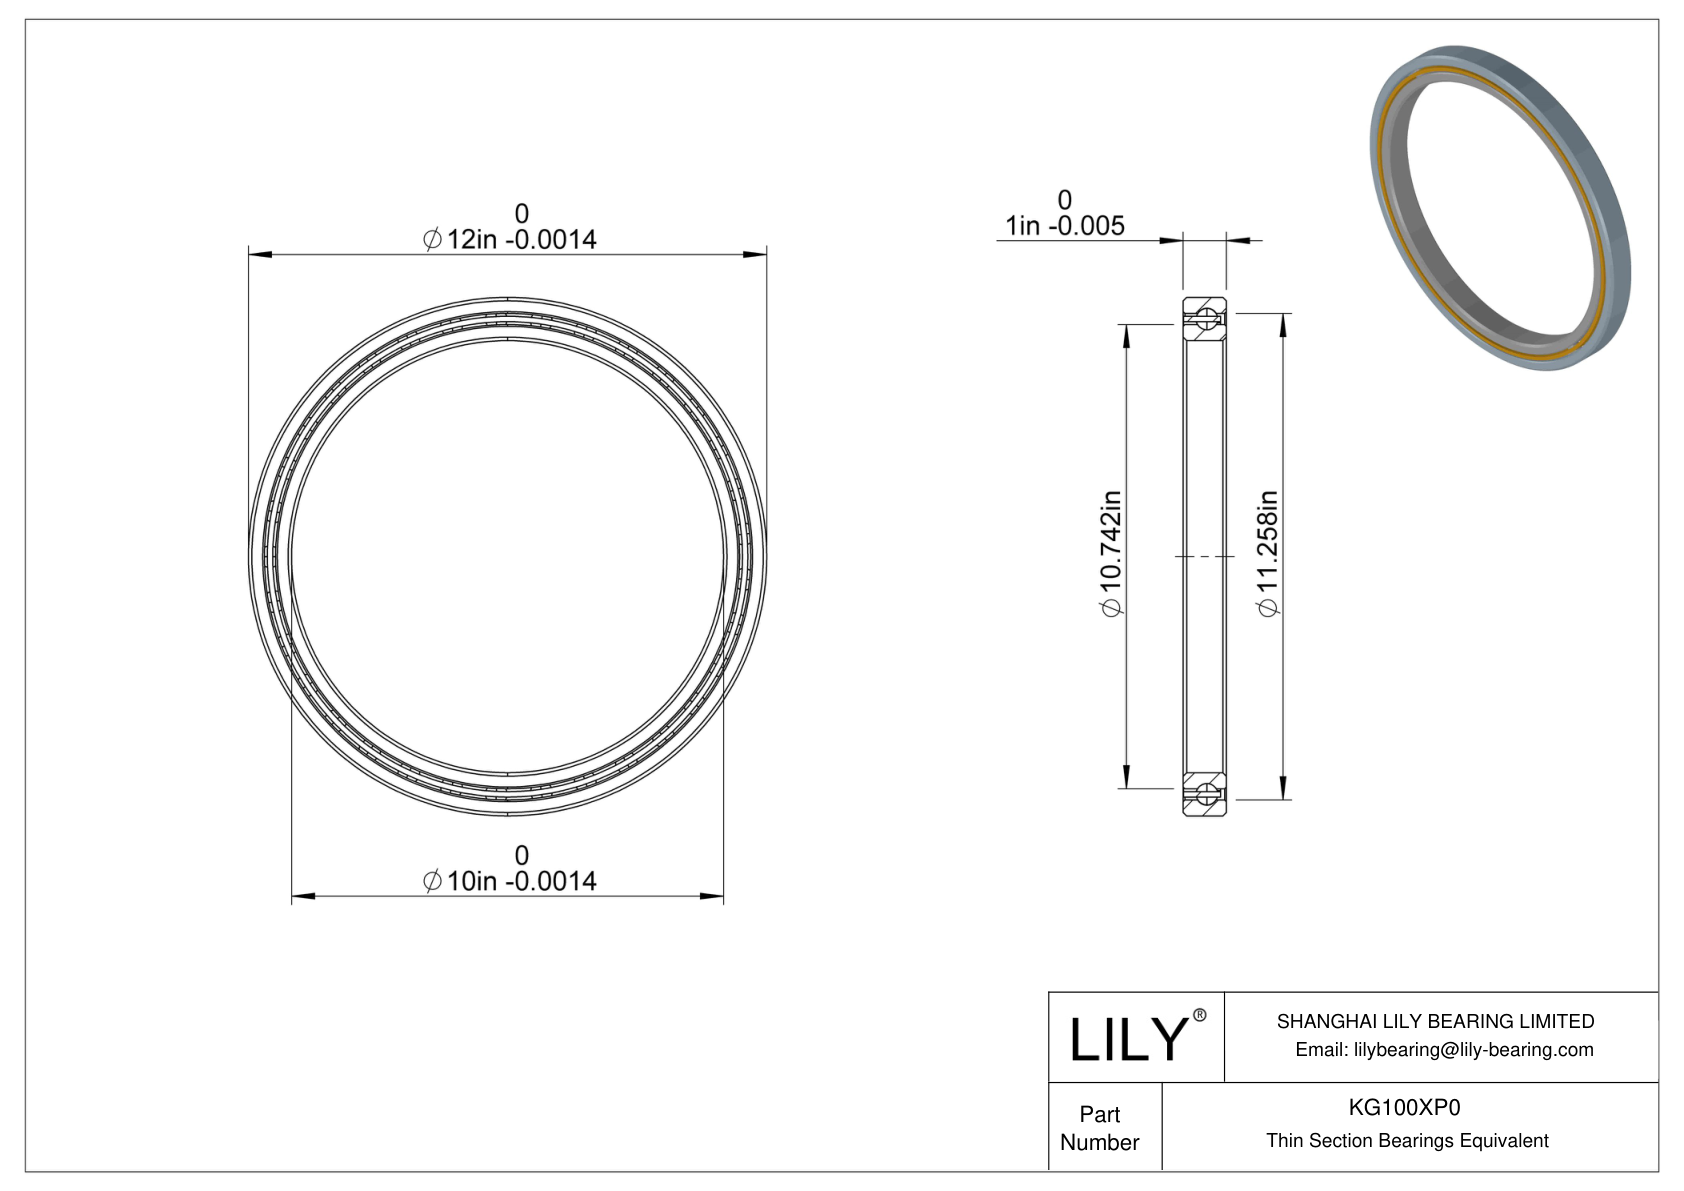 KG100XP0 Constant Section (CS) Bearings cad drawing